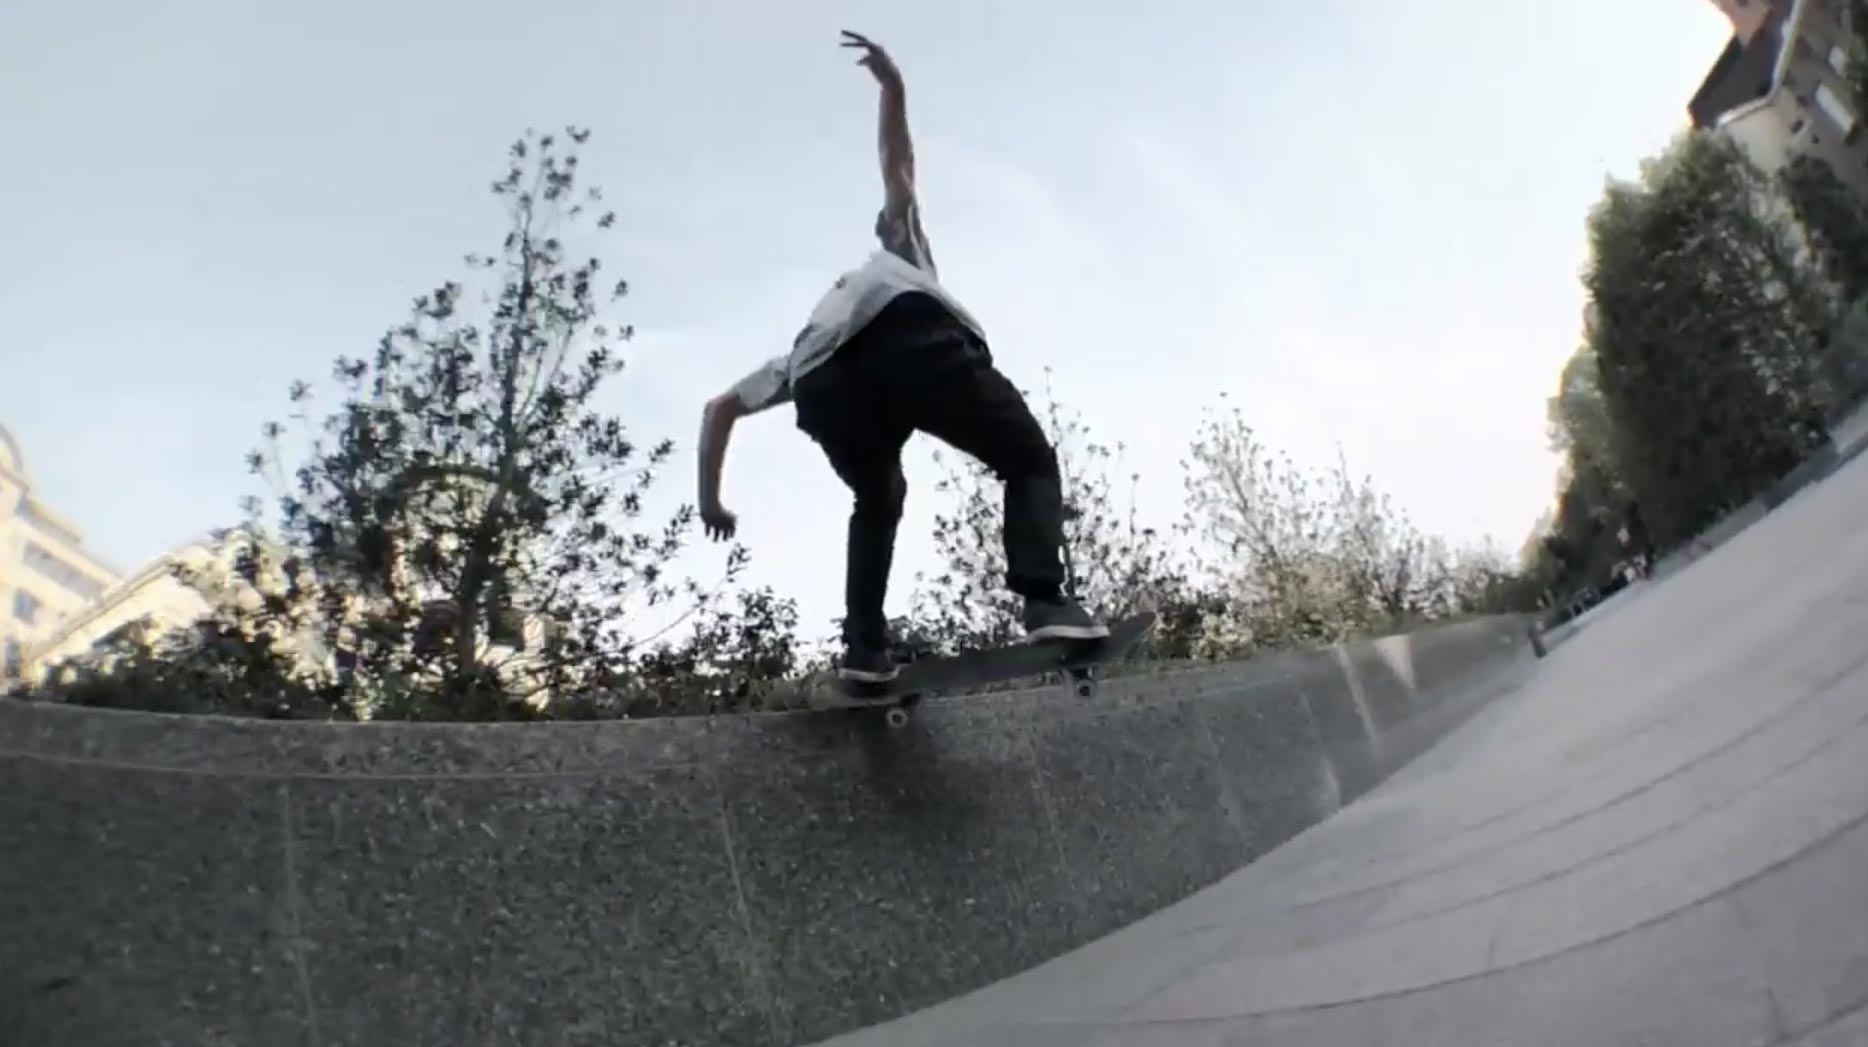 Stylische Skateumentary: Uncommon Places uncommon-places 